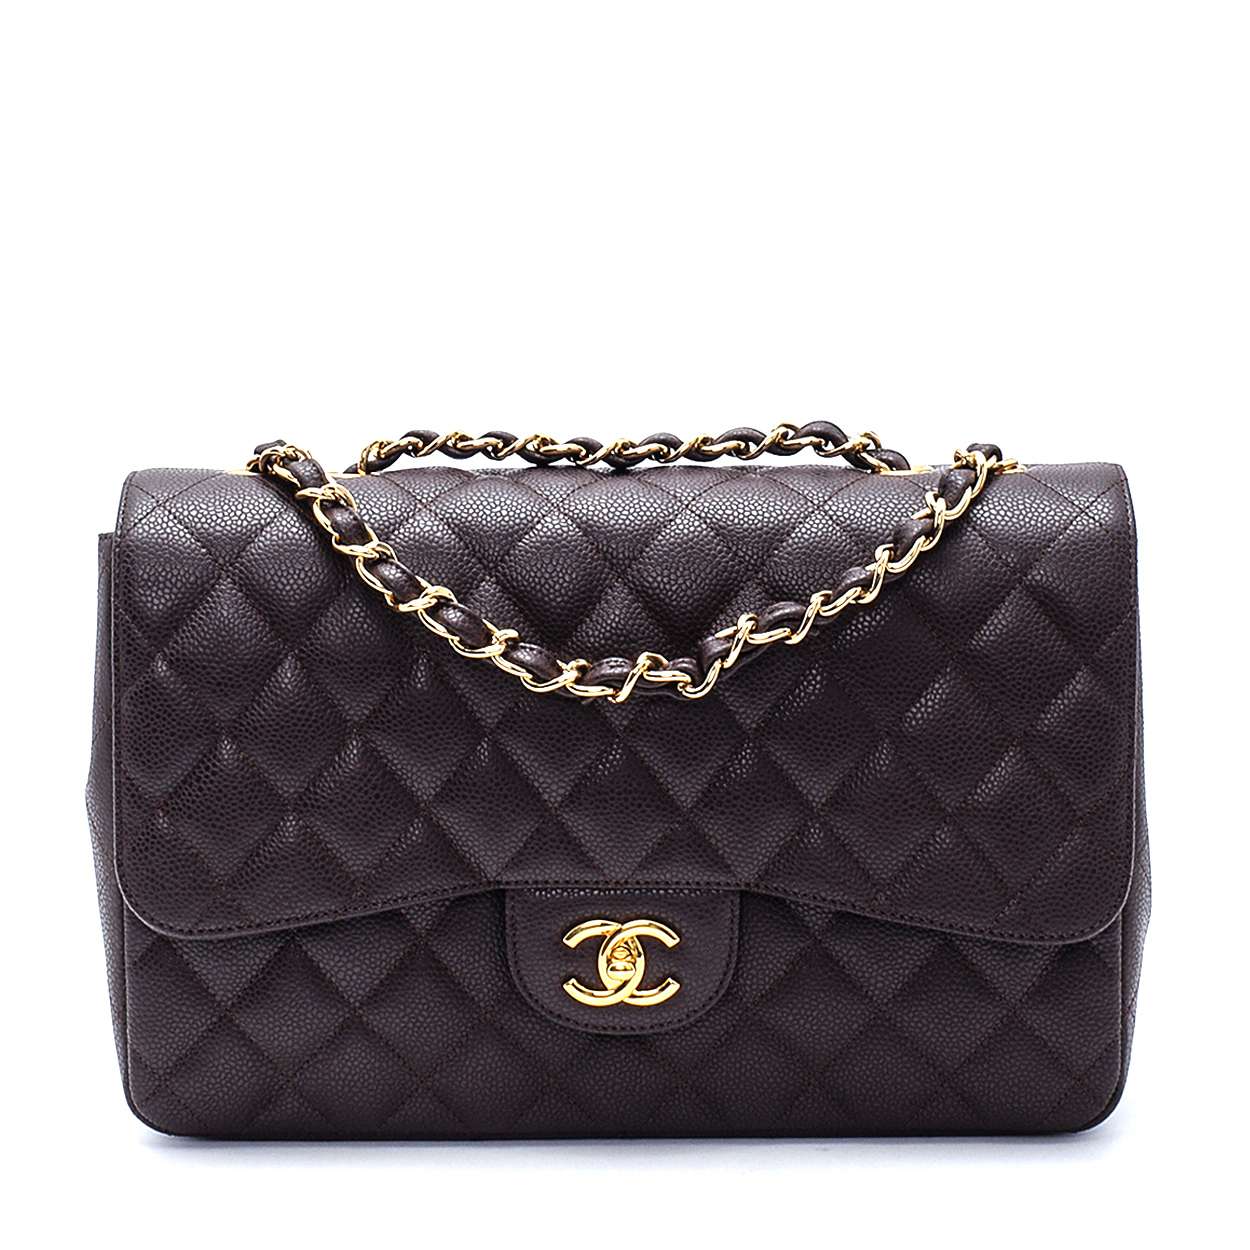 Chanel - Dark Brown Caviar Leather Quilted Single Jumbo Flap Bag